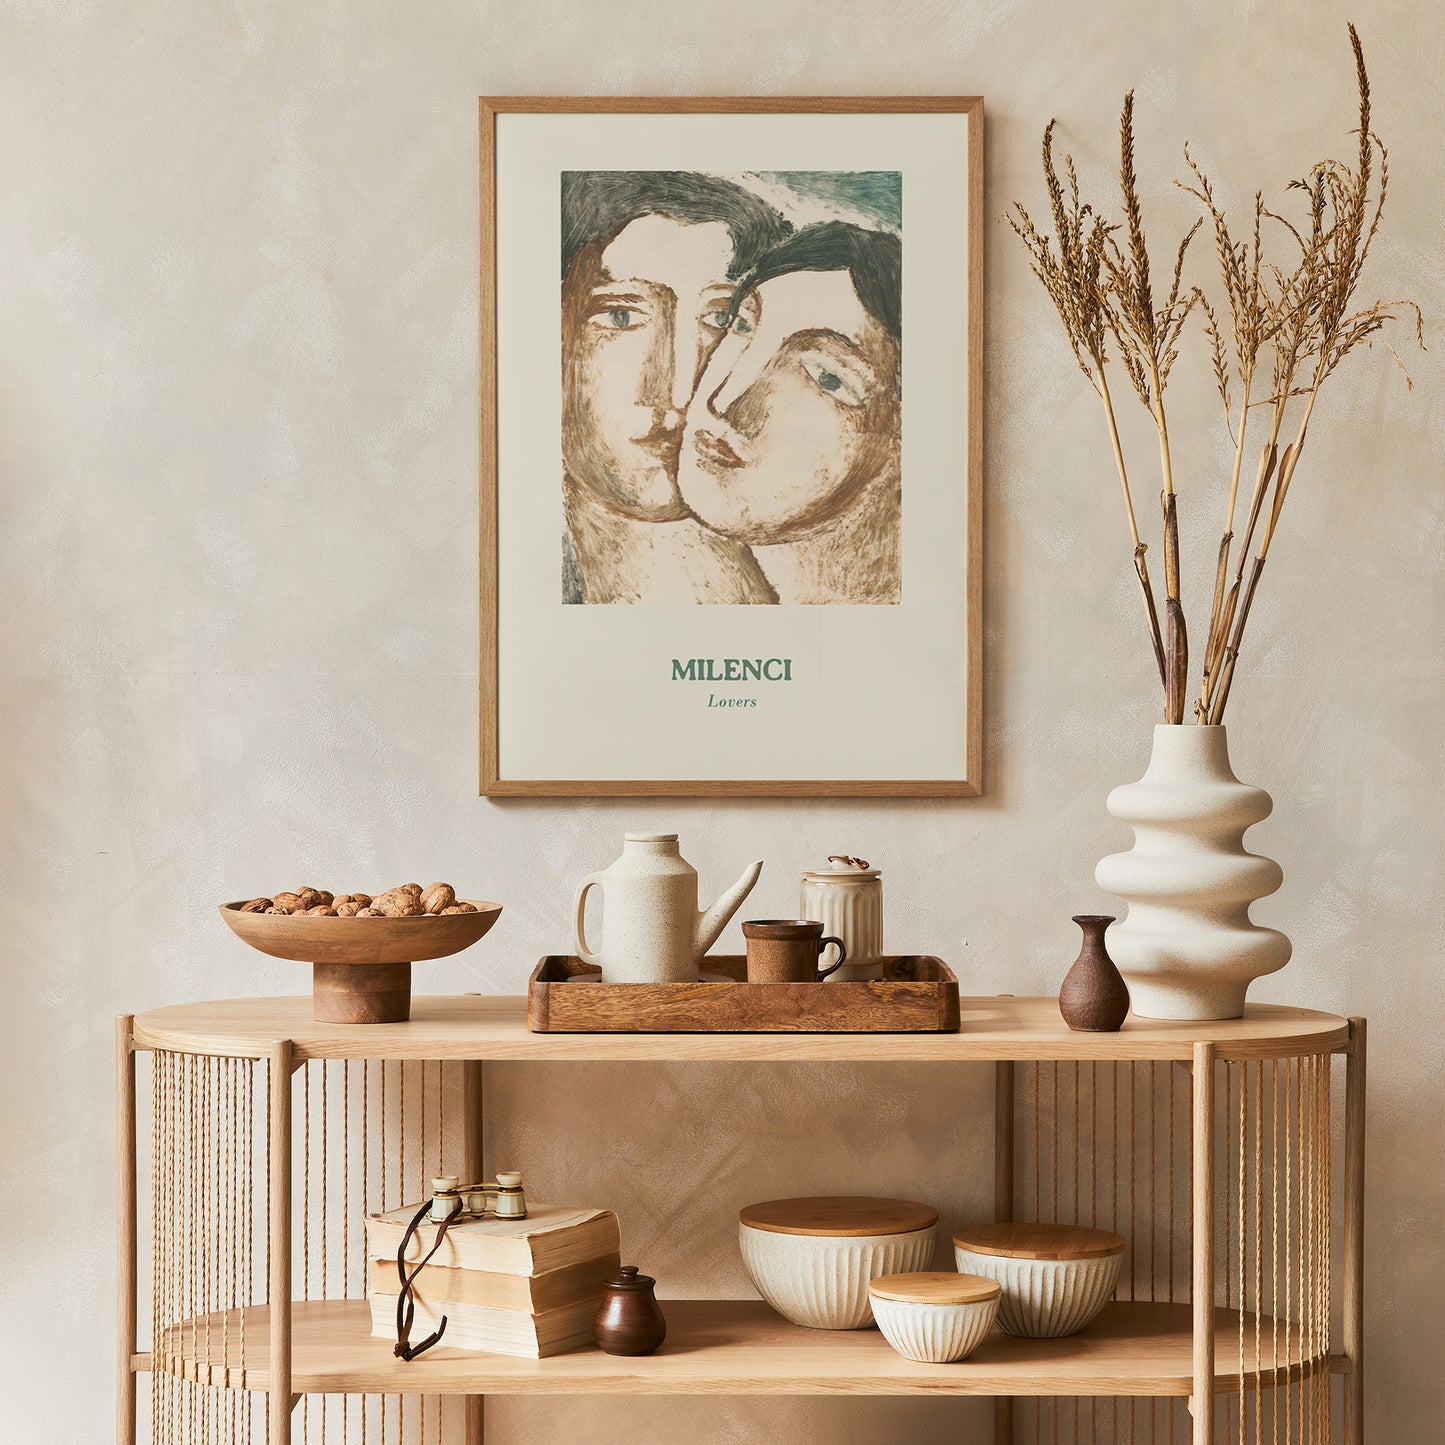 Milenci, Lovers Poster